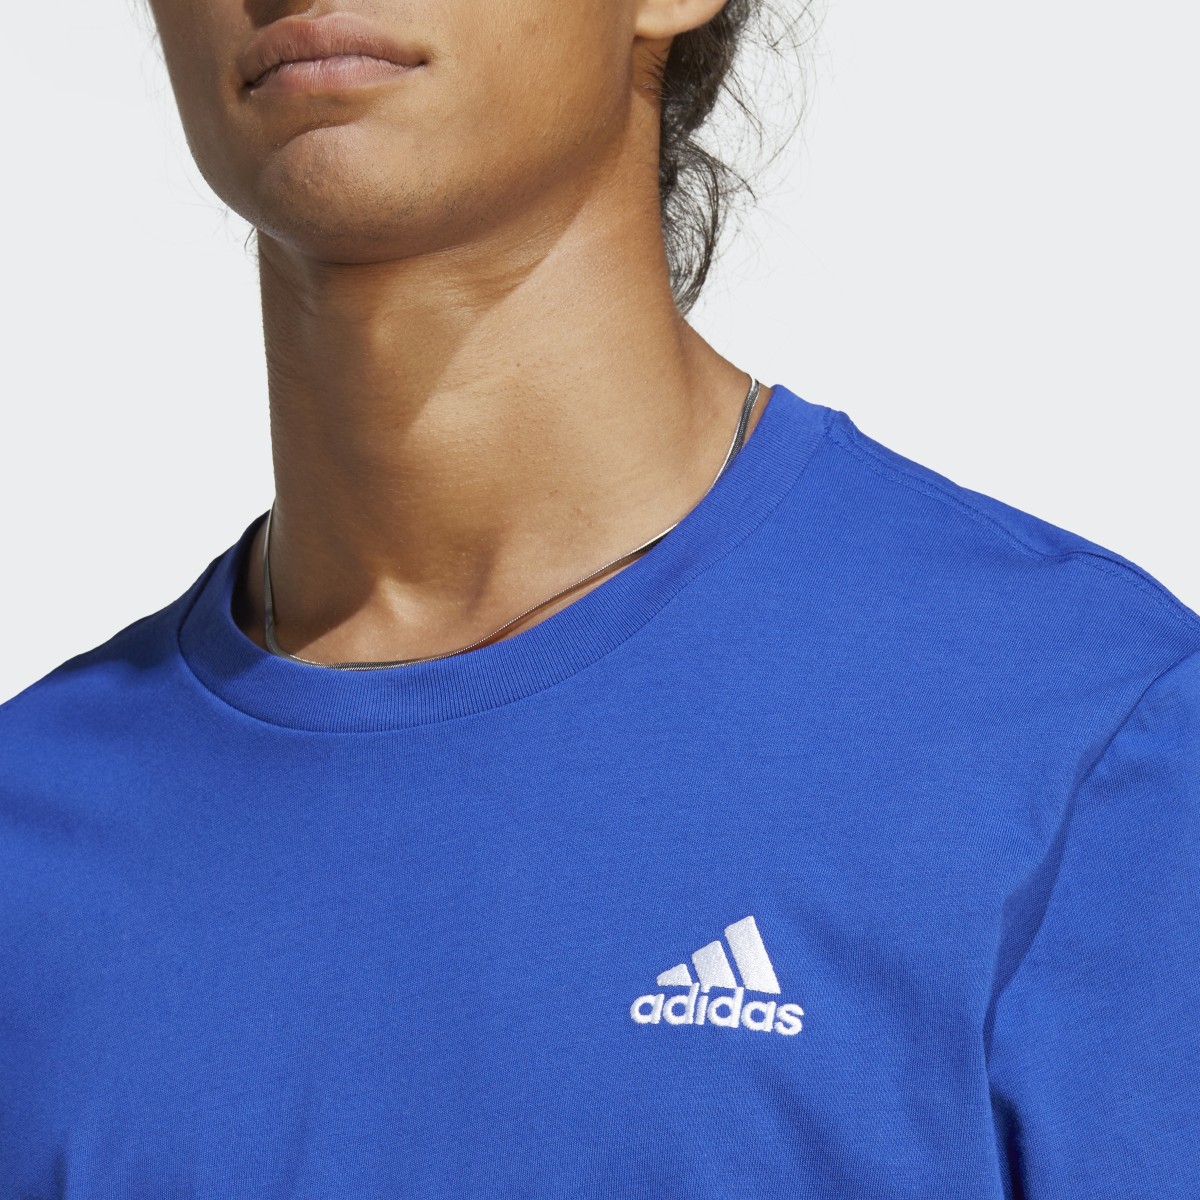 Adidas T-shirt Essentials Single Jersey Embroidered Small Logo. 6